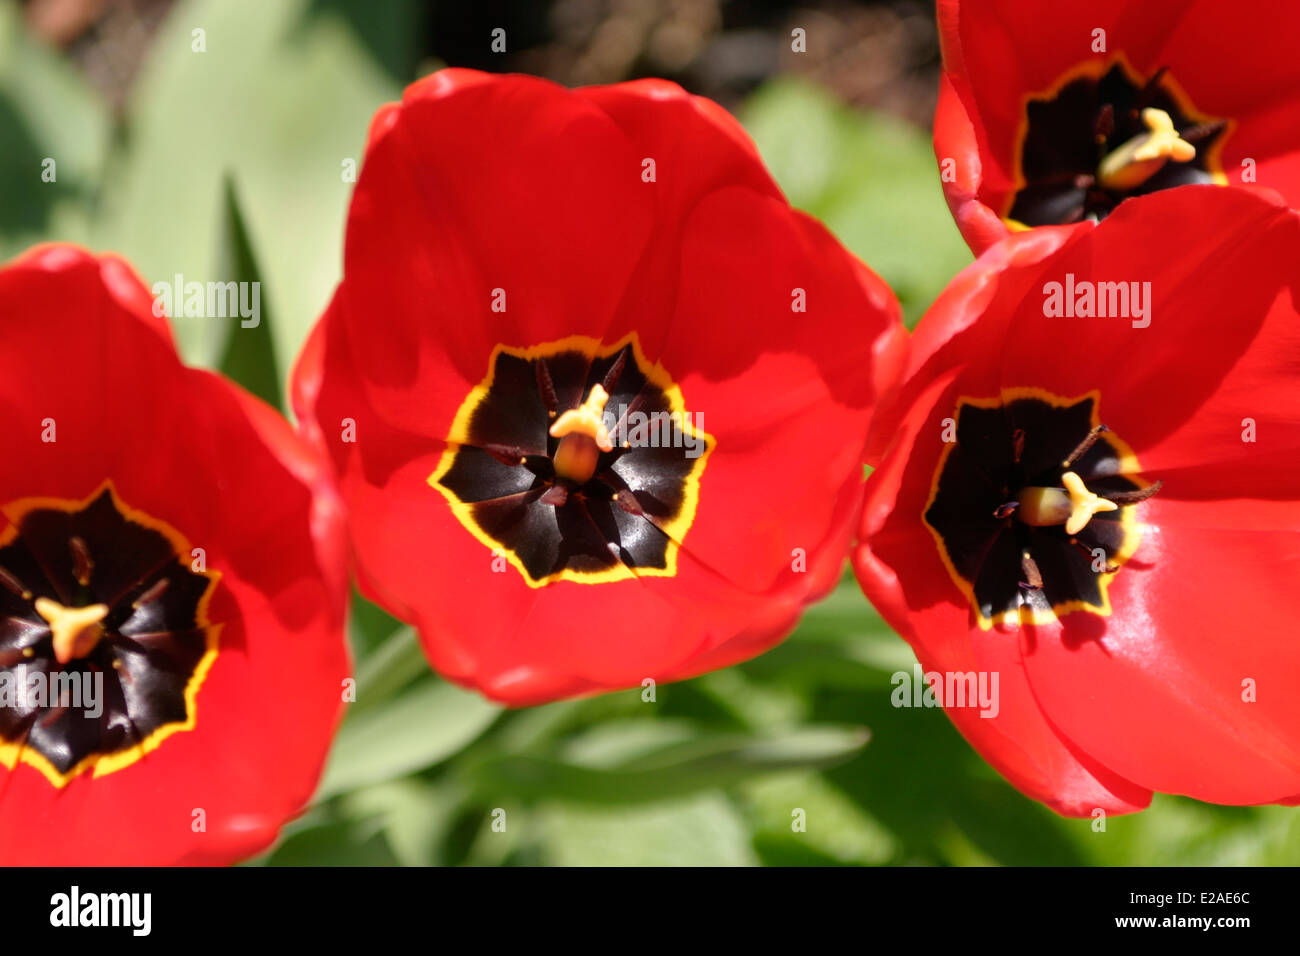 Four red Tulips with yellow and black centres, in bloom against a green background. Stock Photo